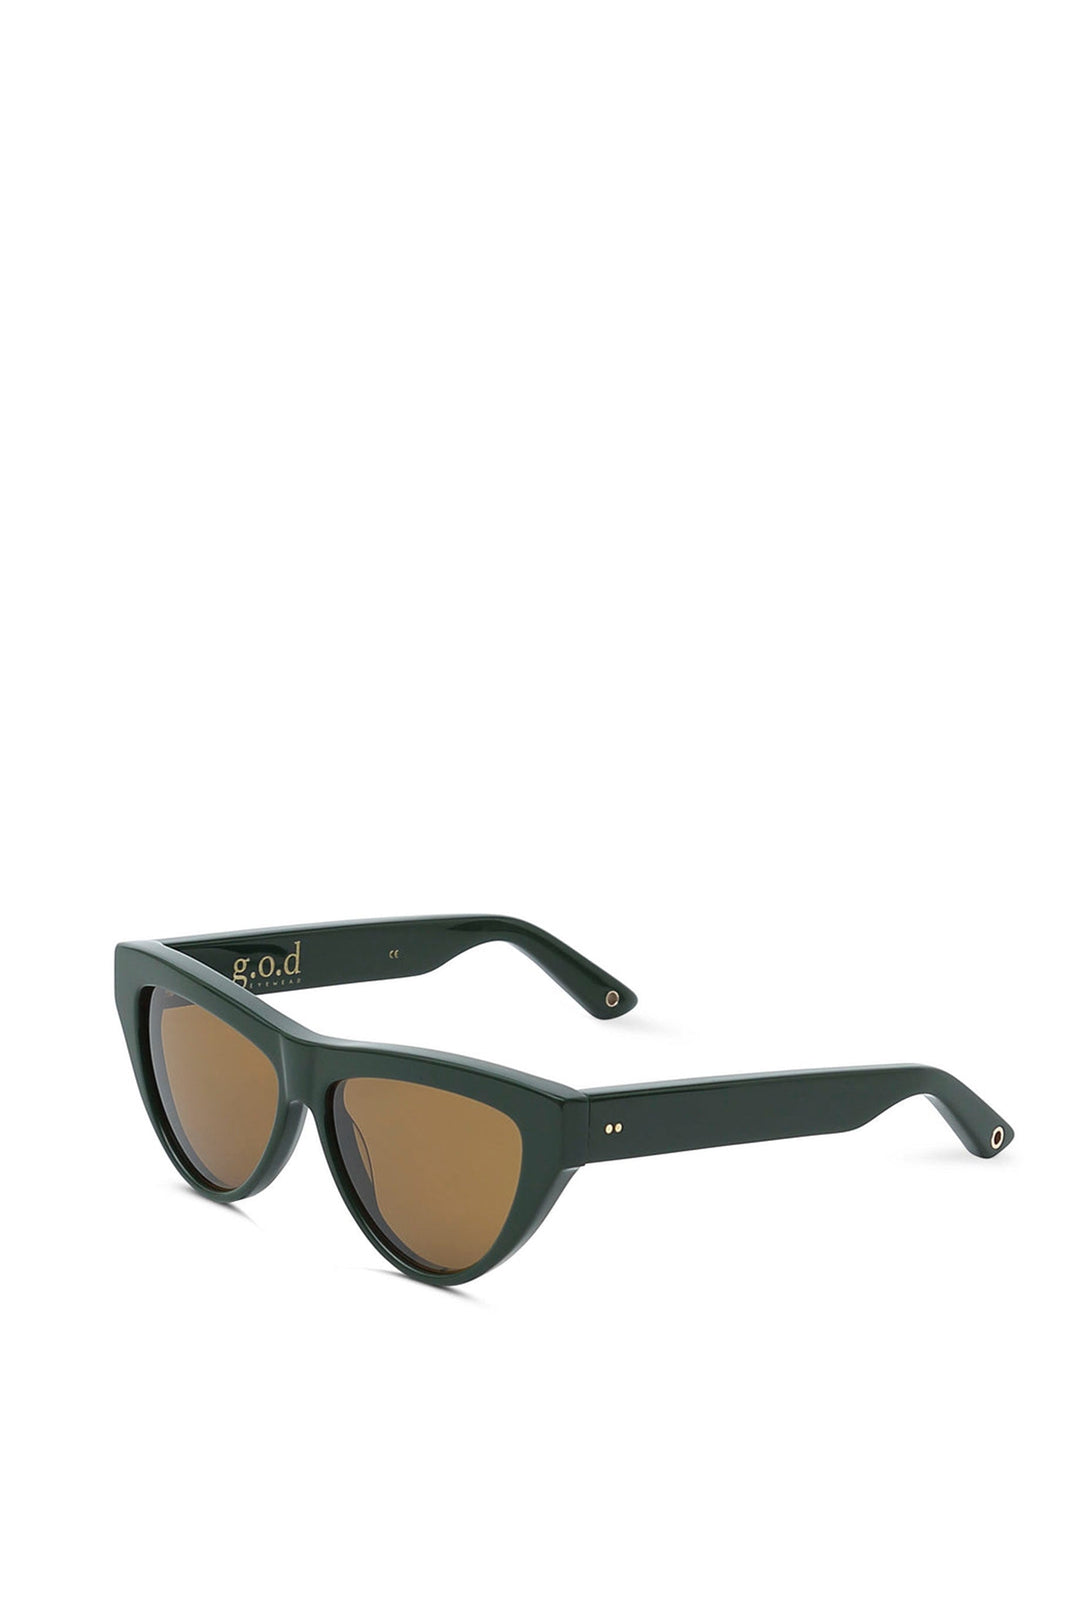 g.o.d 15 Sunglasses - Forest